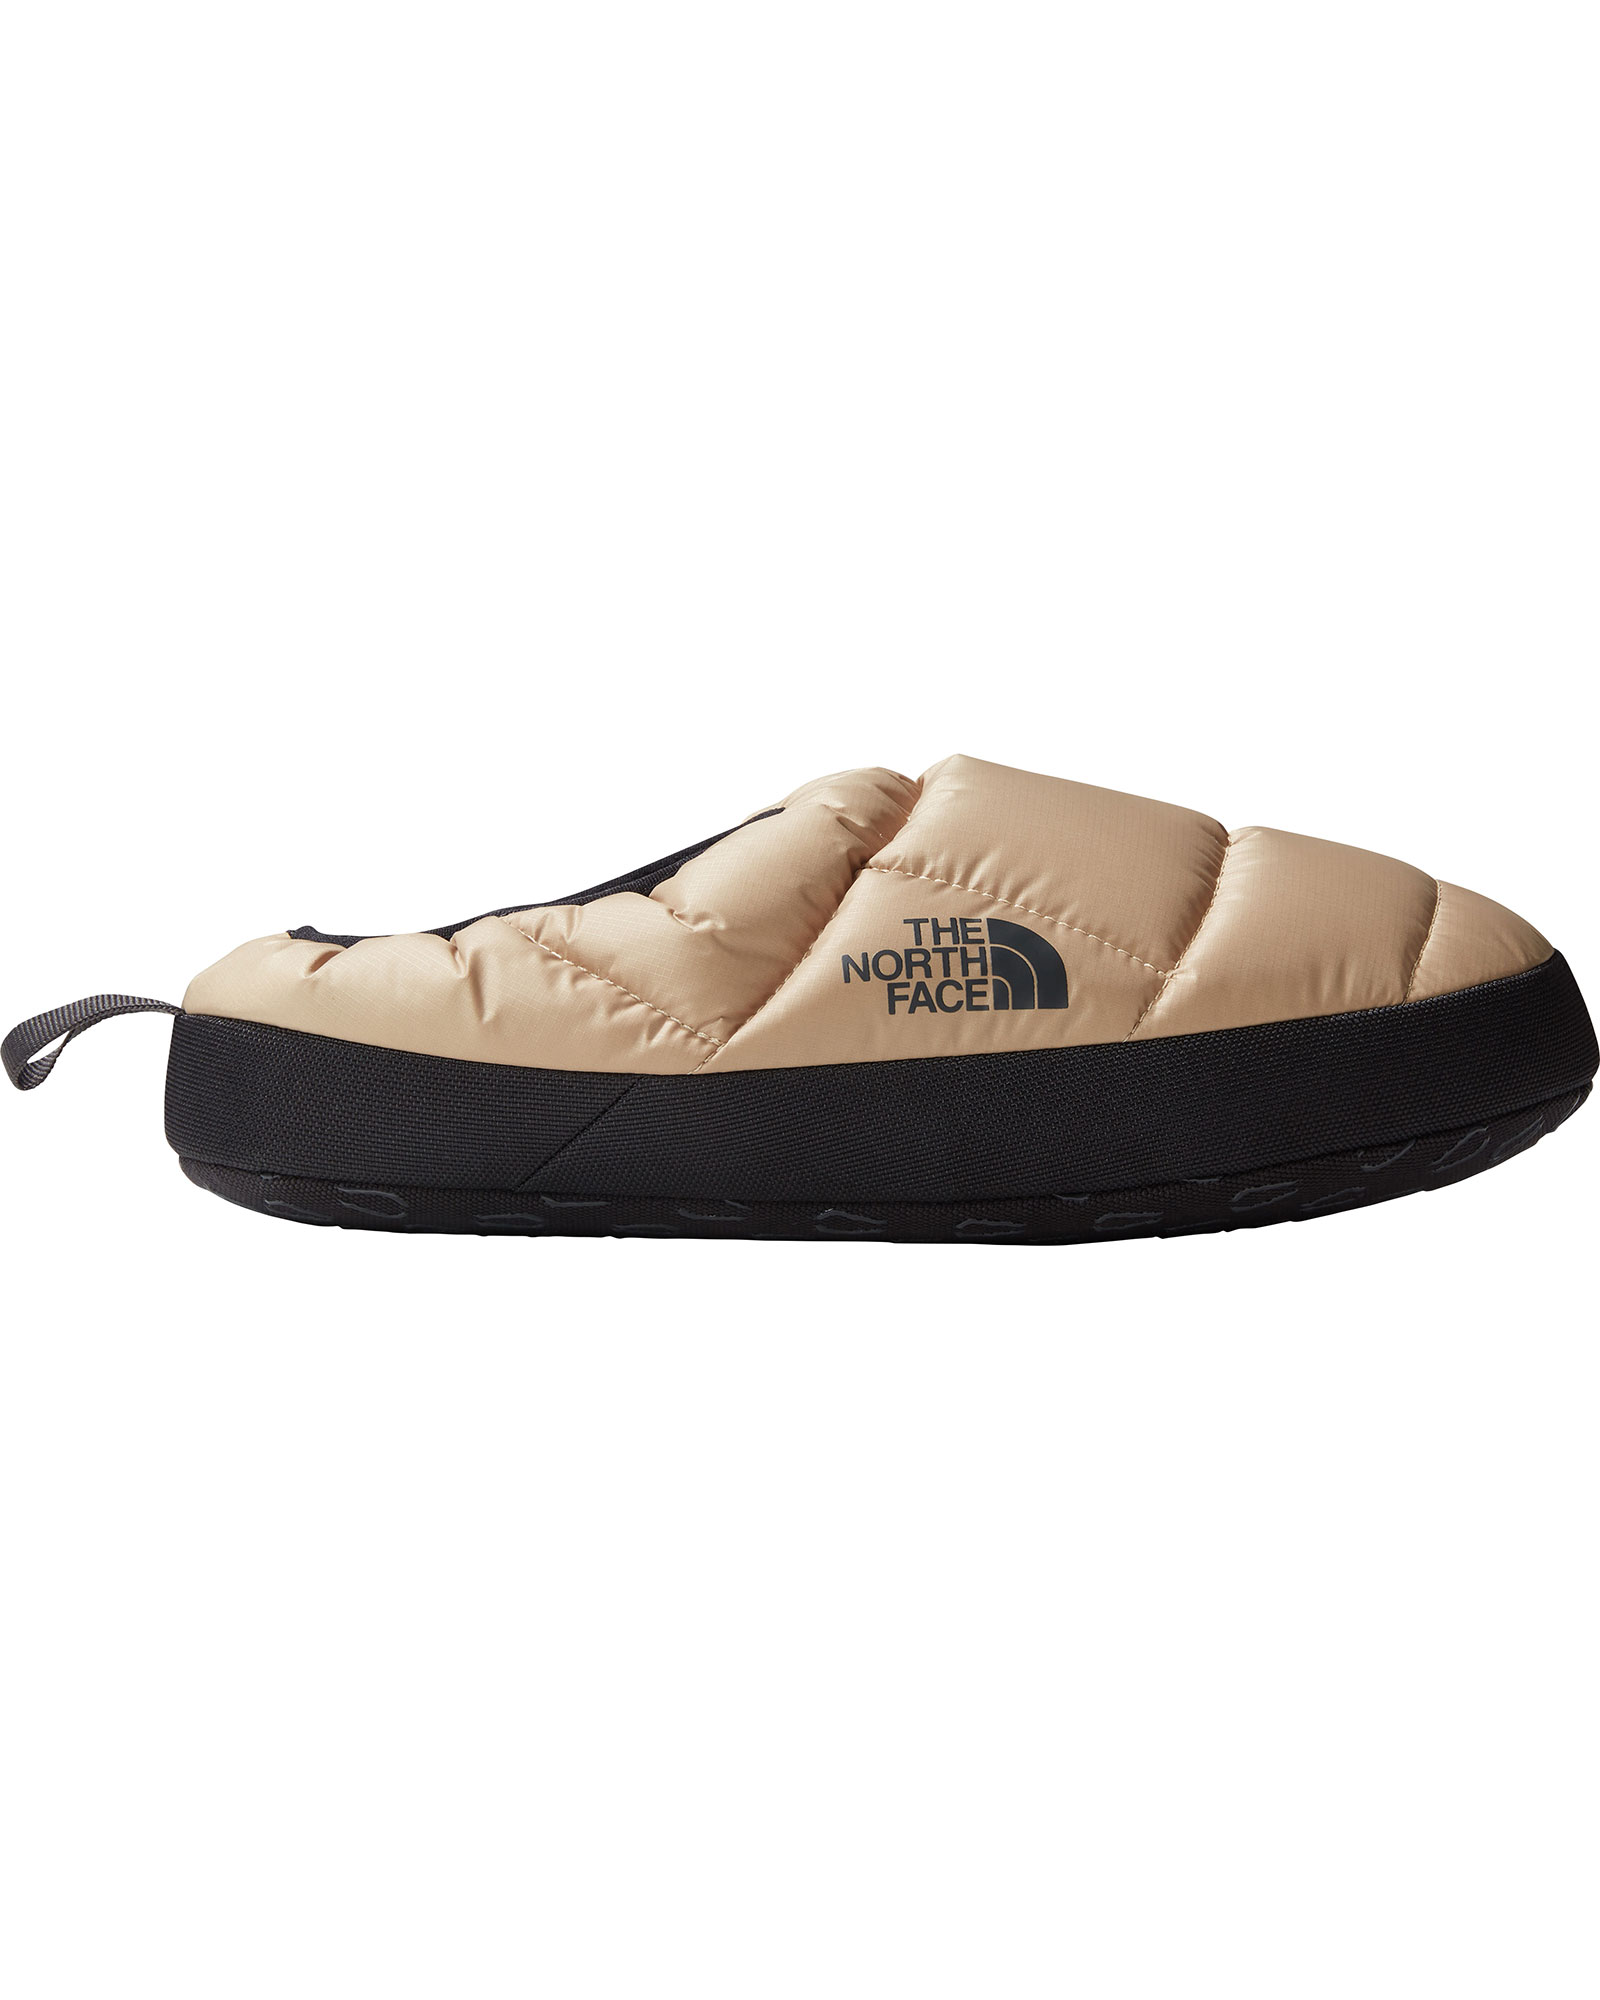 The North Face Men’s ThermoBall NSE Mules III - Khaki Stone/TNF Black XL